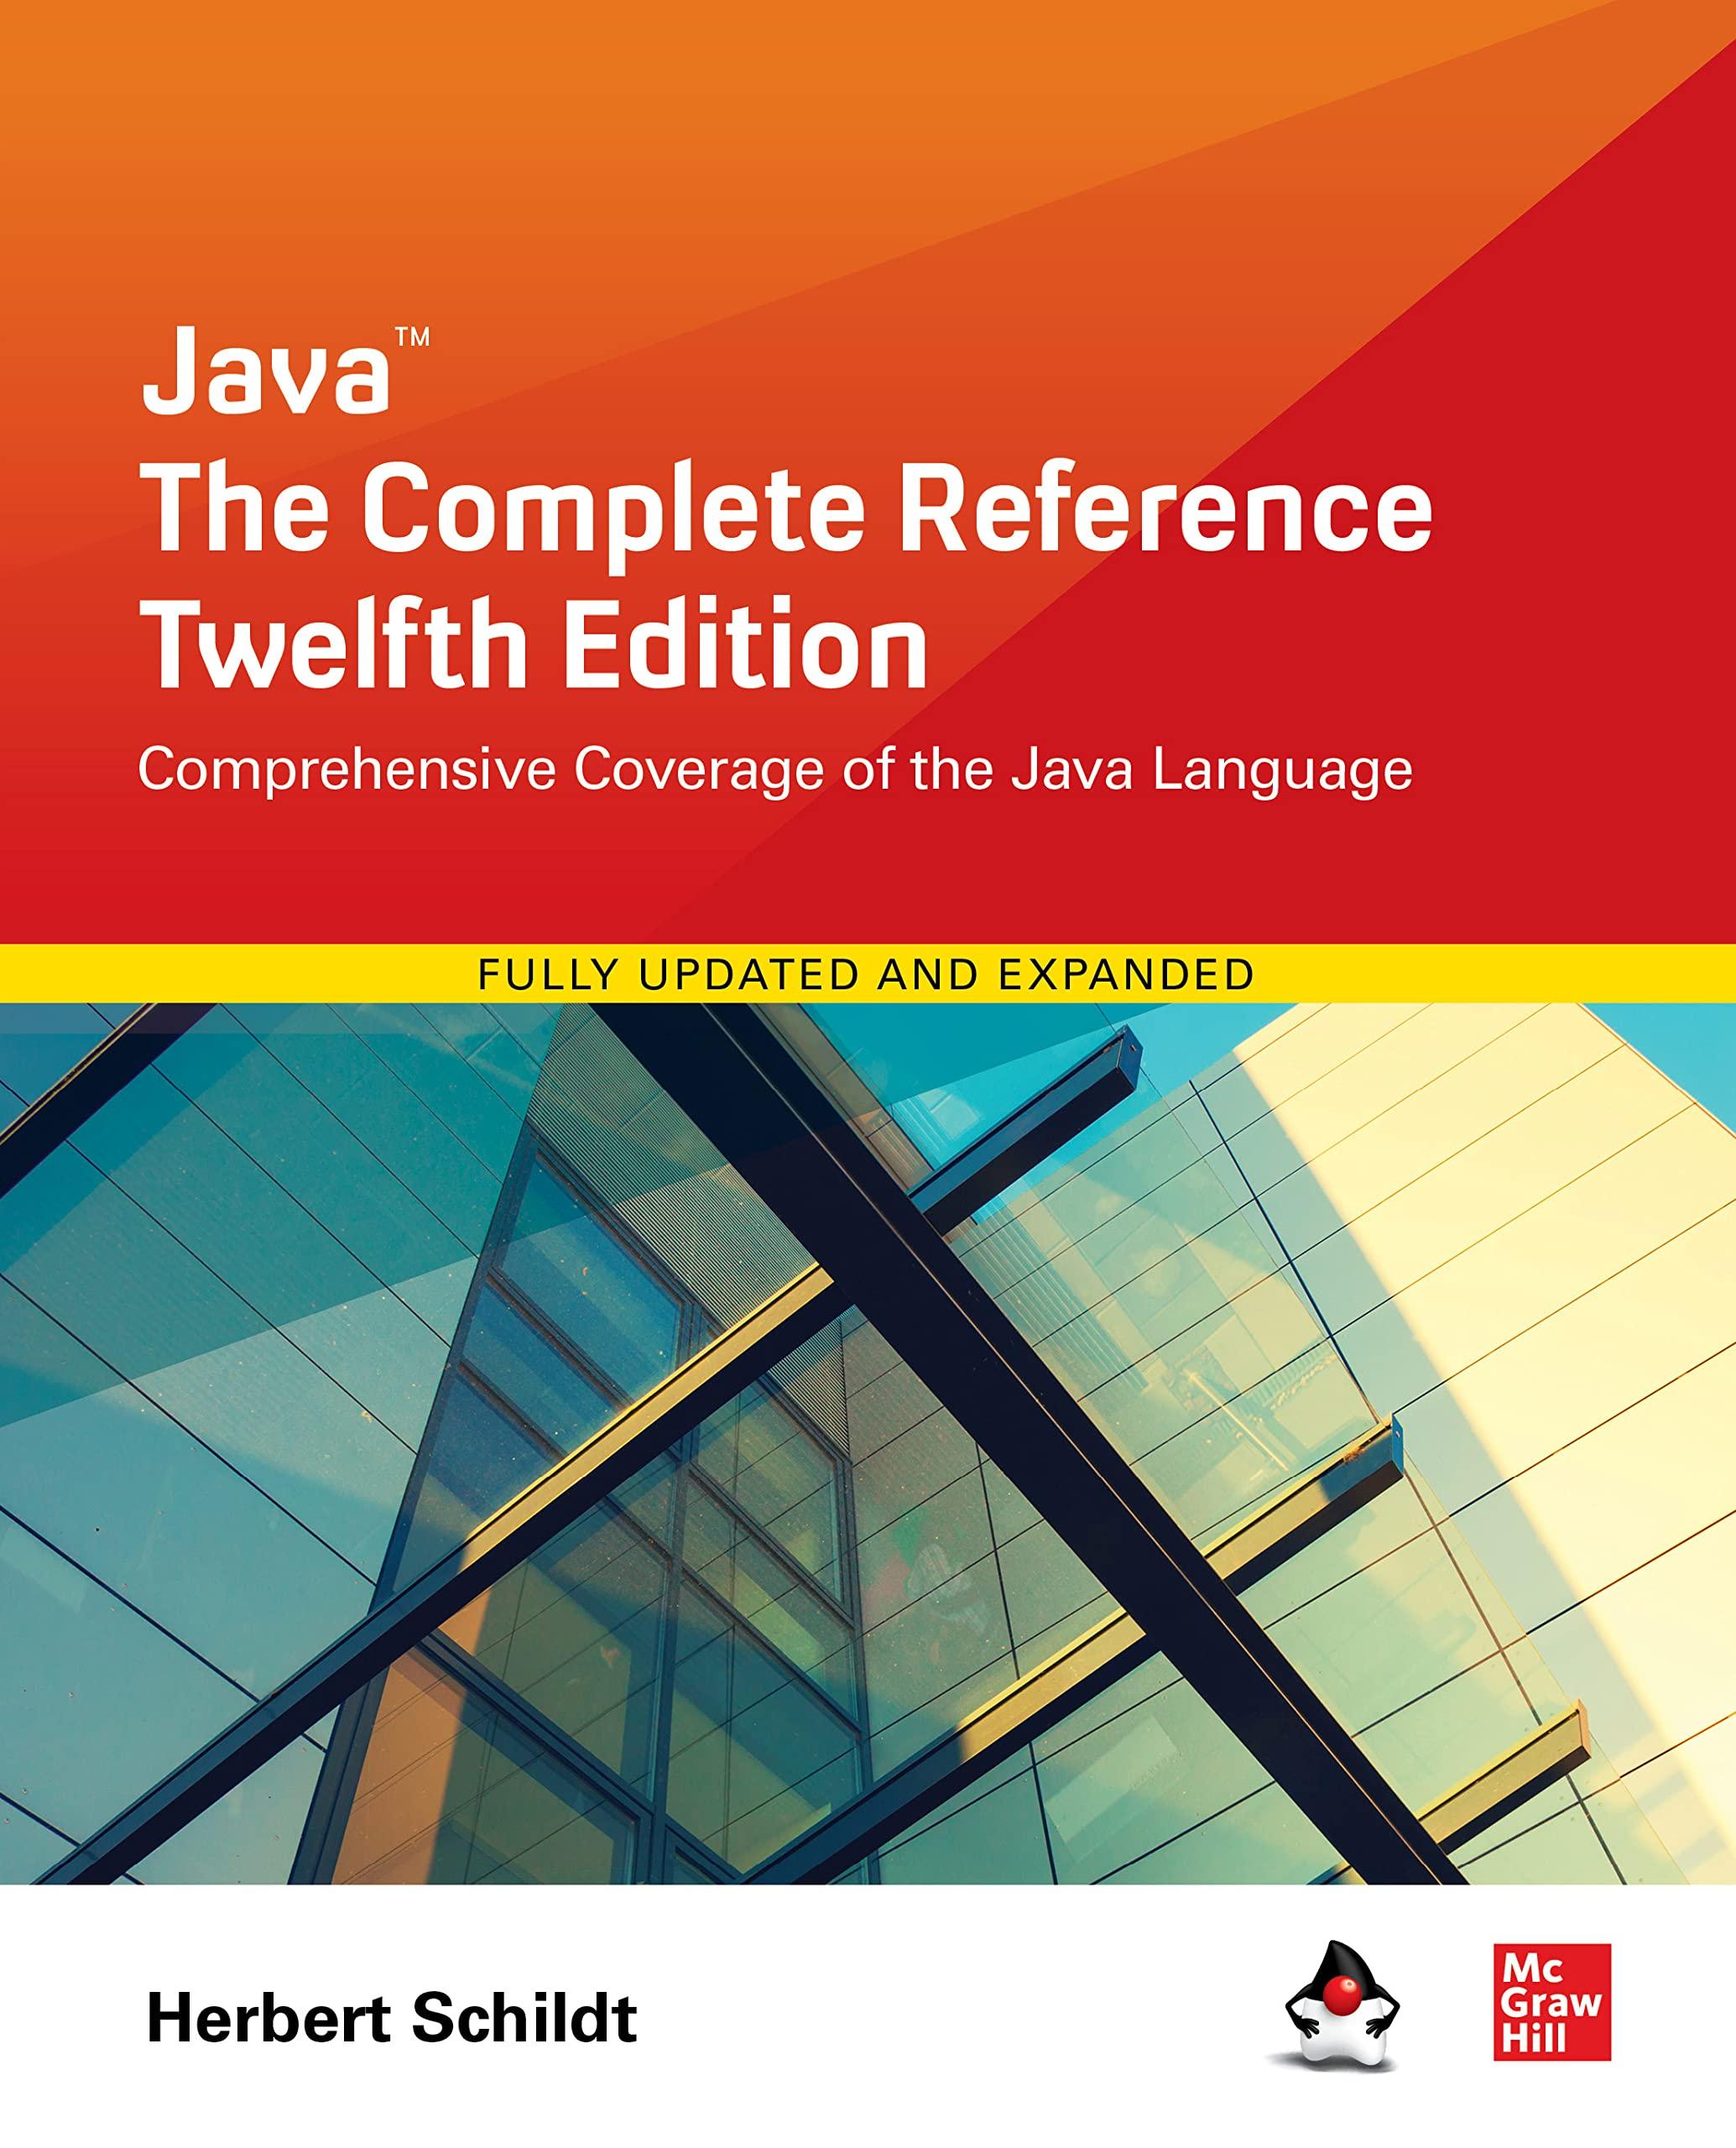 java the complete reference comprehensive coverage of the java language twelfth edition herbert schildt